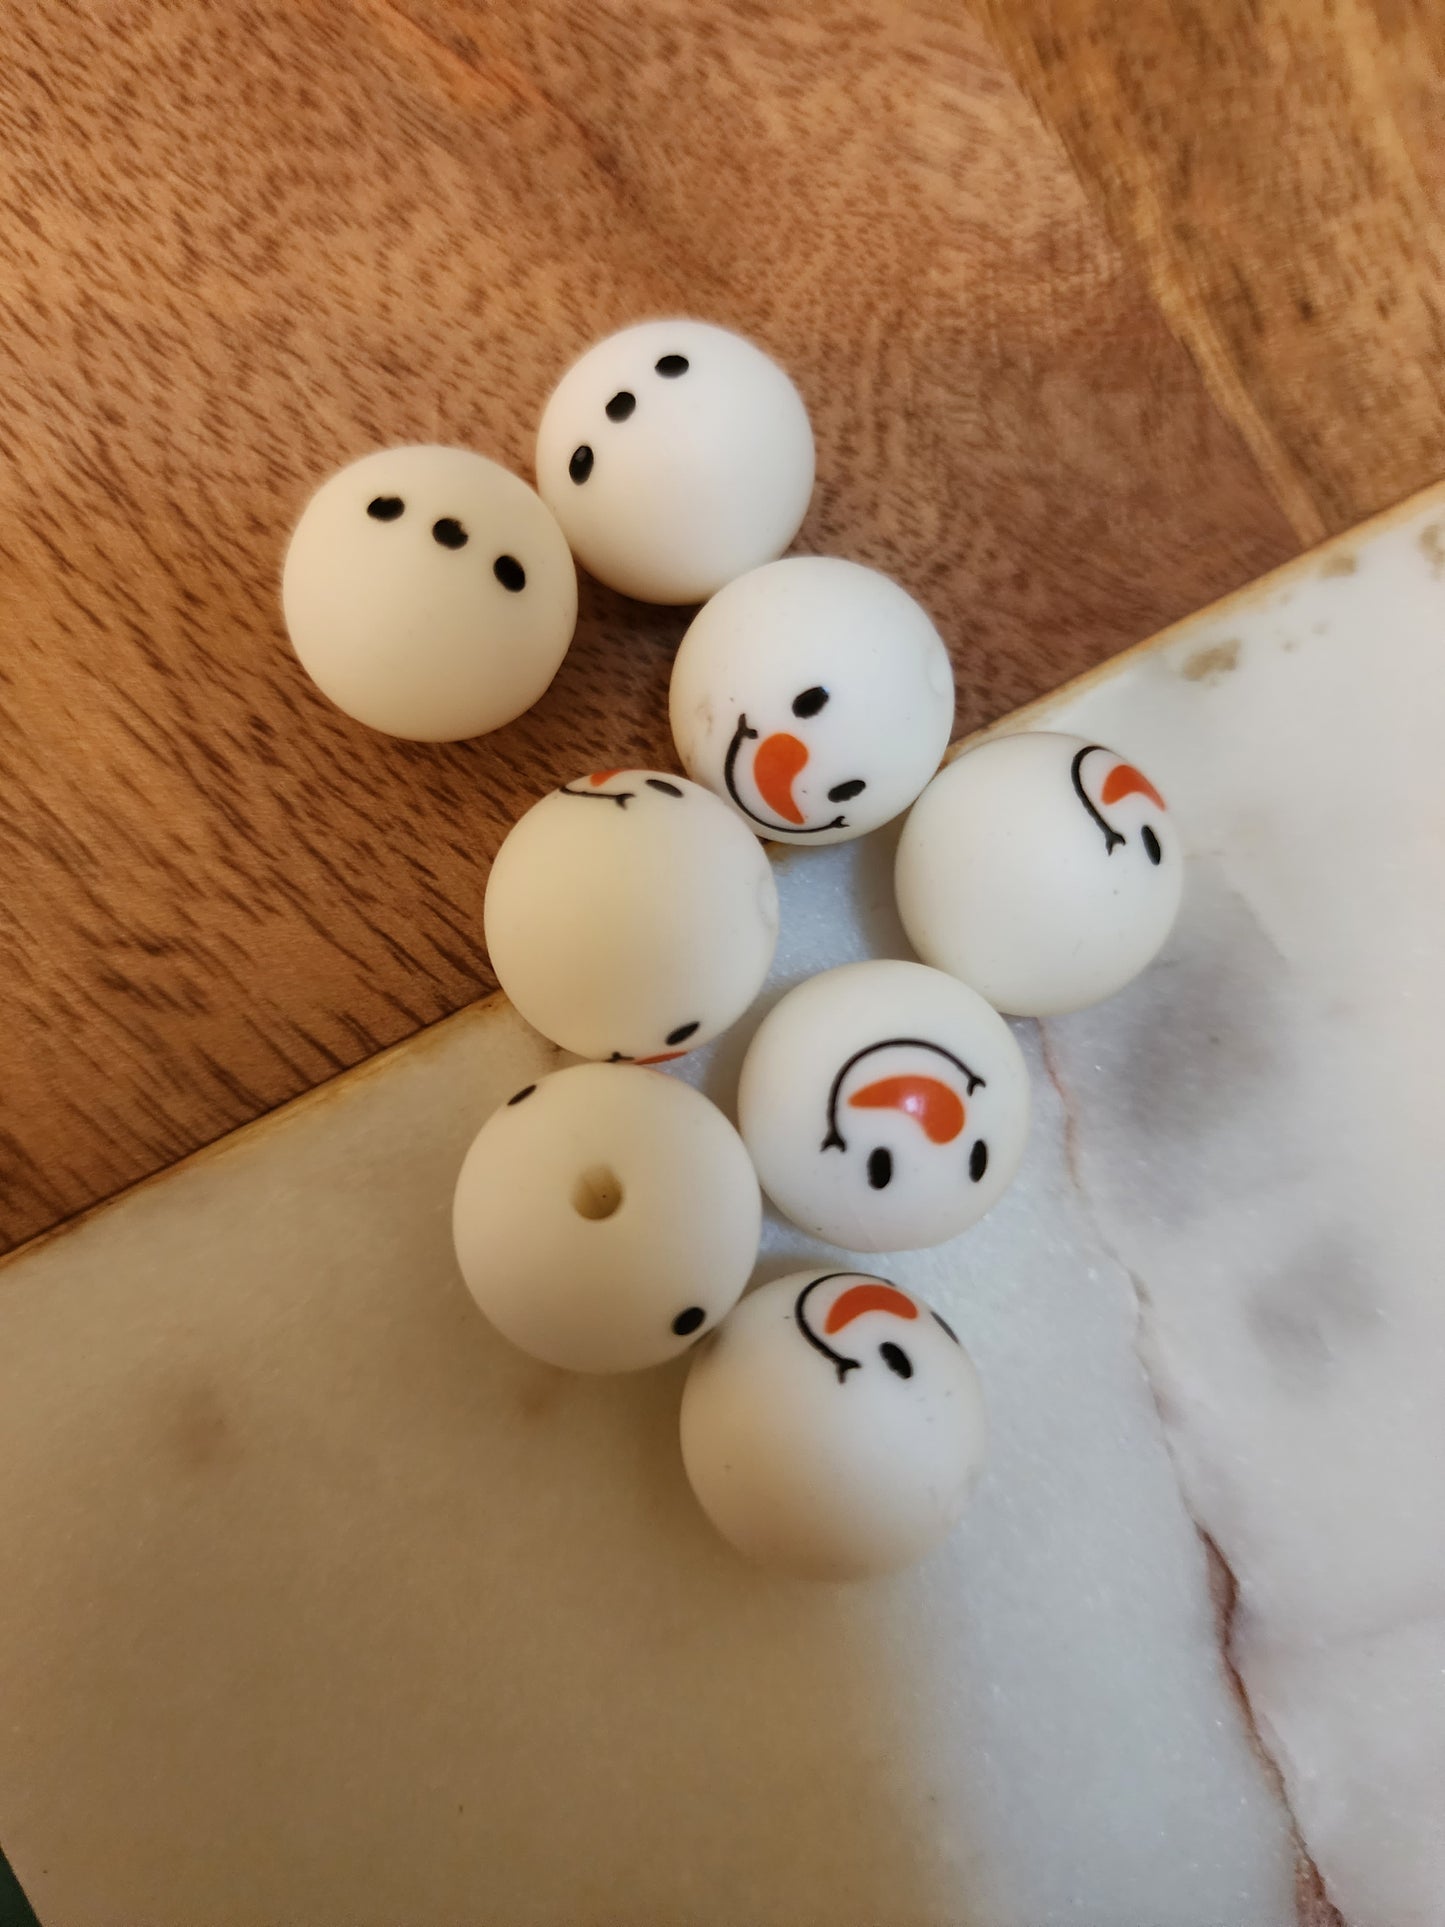 Snowman parts silicone body and head